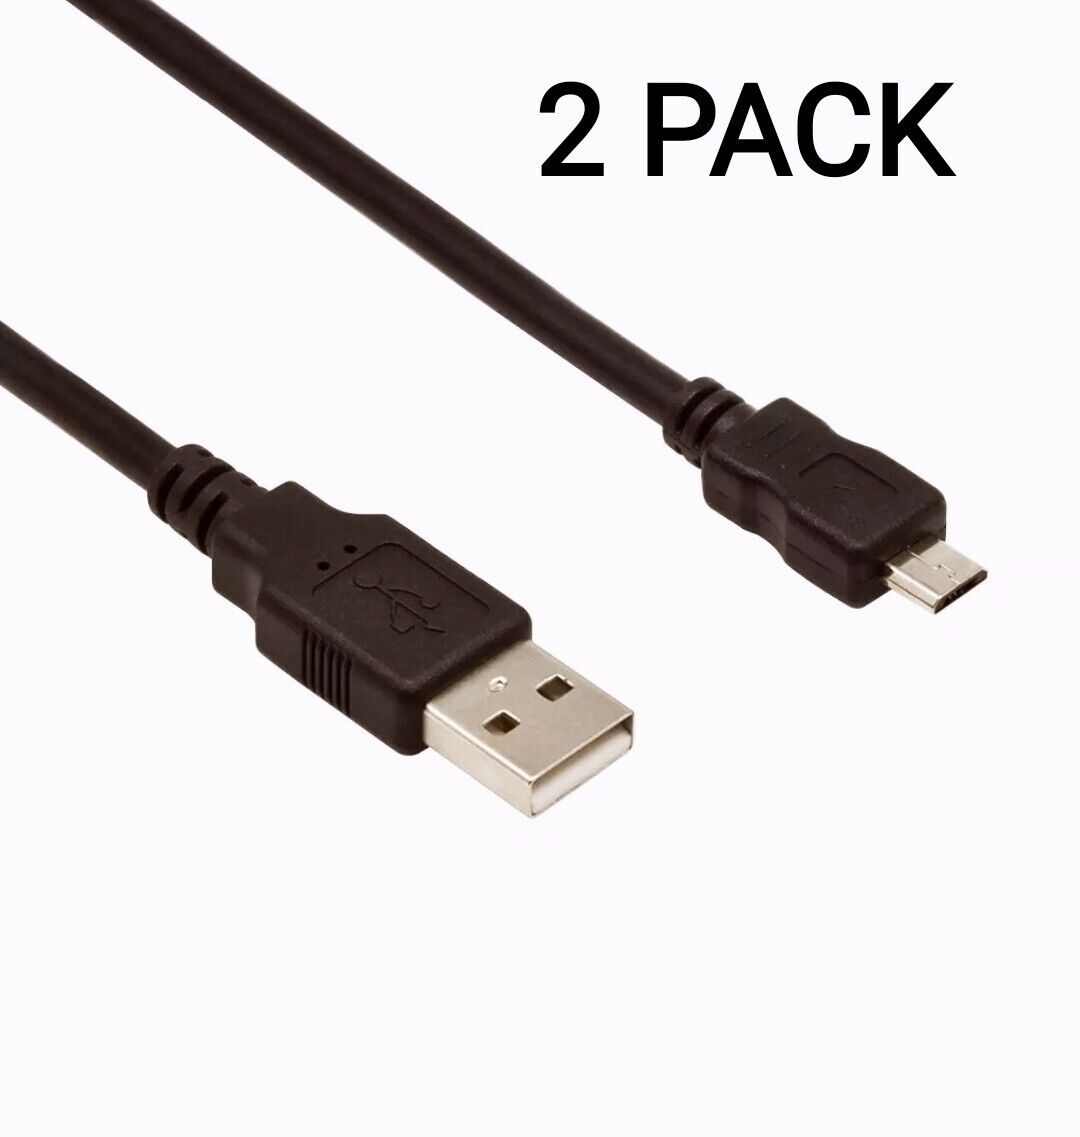 2 Pack 10Ft USB 2.0 A MALE TO MICRO B MALE CABLE BLACK COLOR